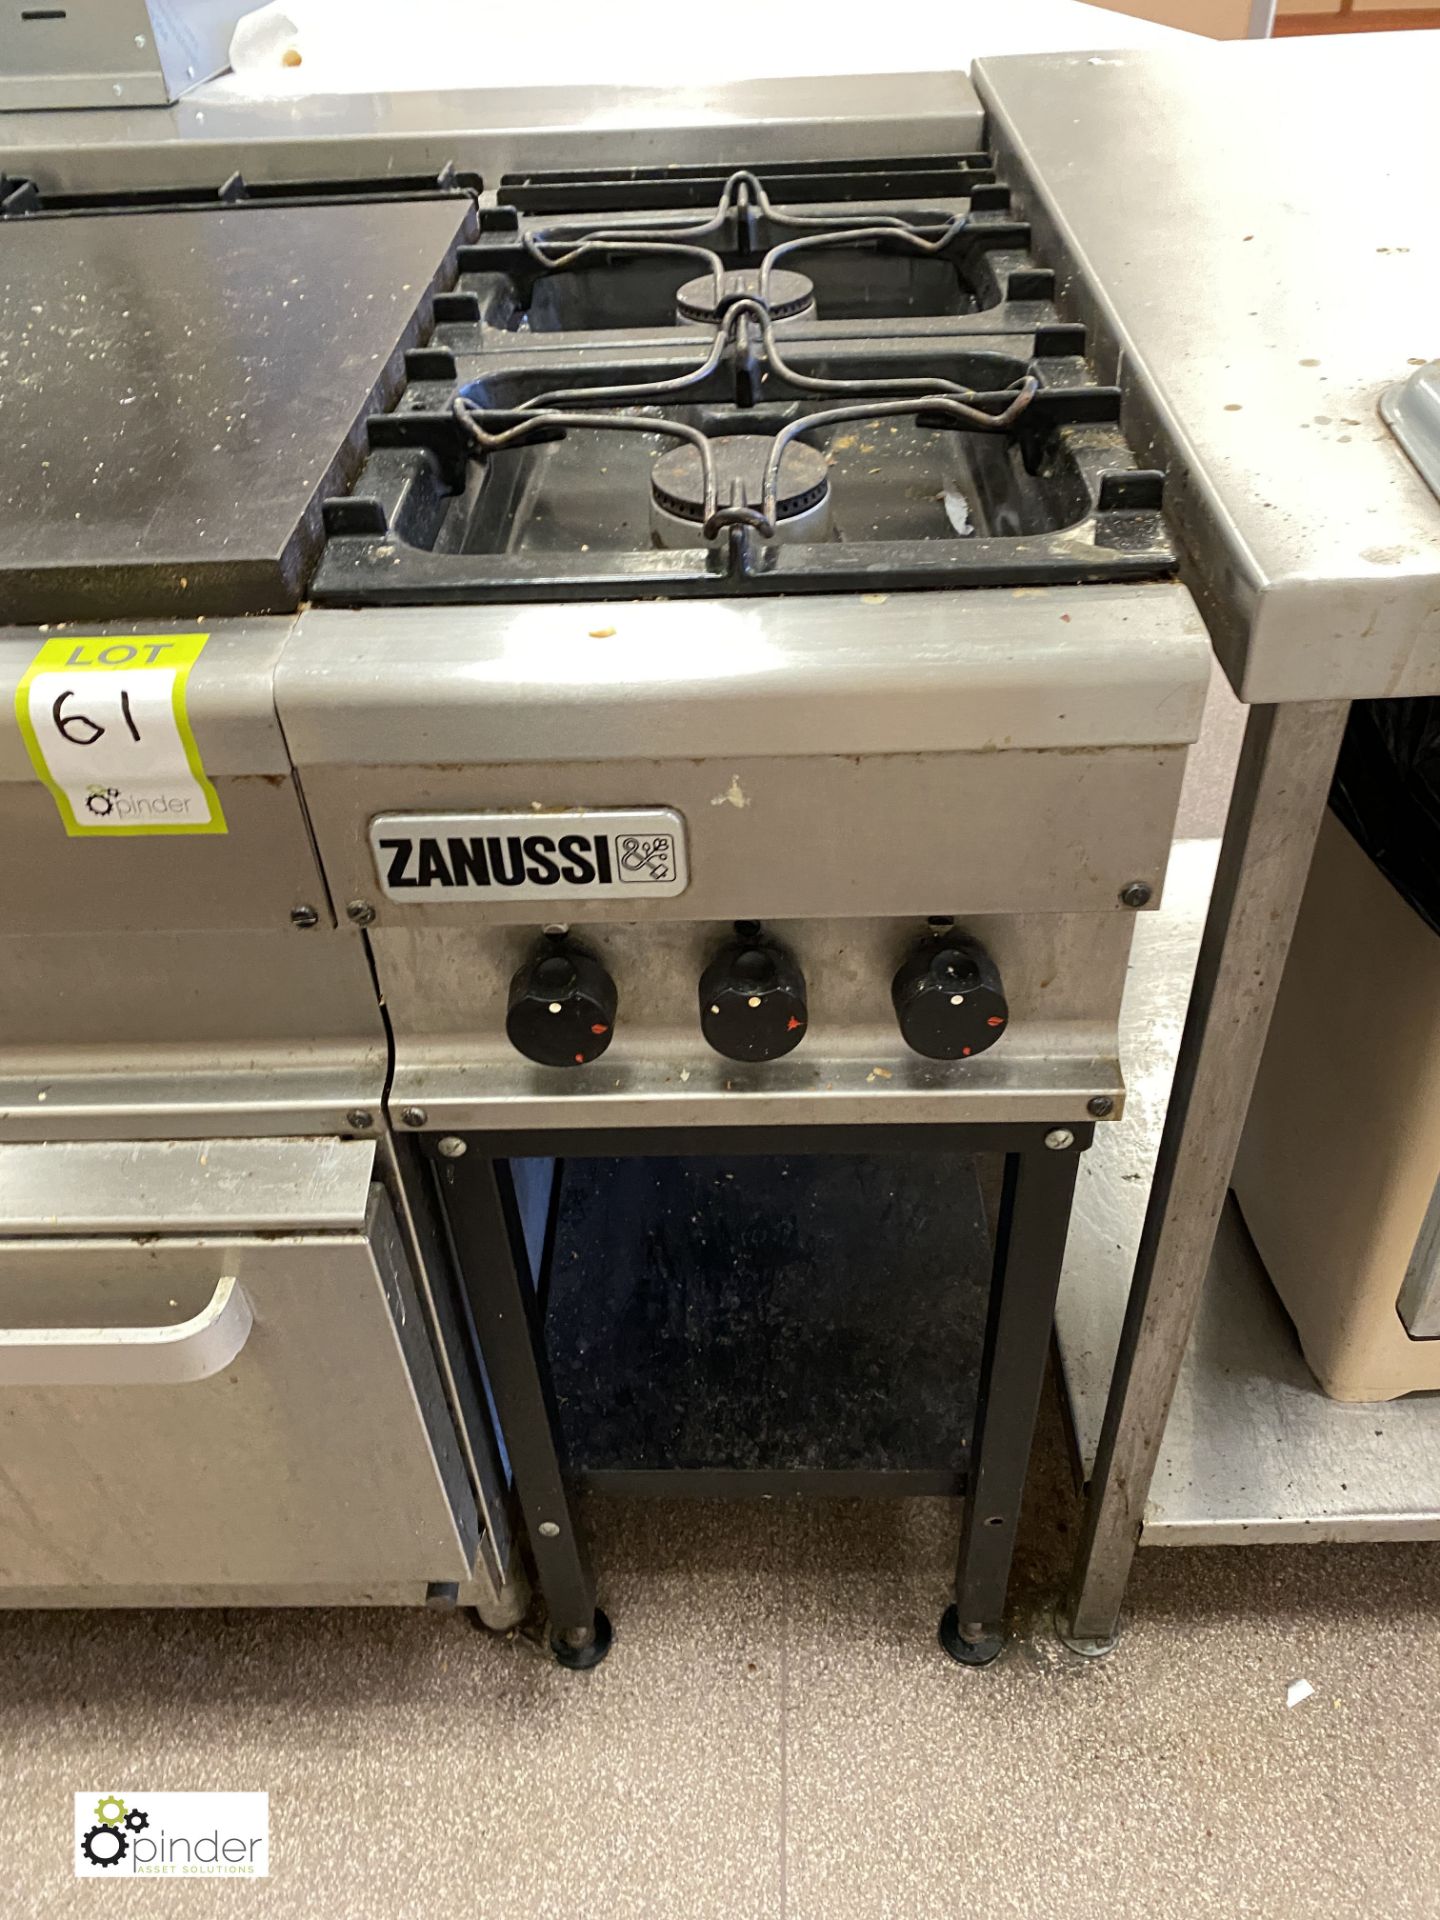 Zanussi stainless steel Contact Gas Range, with additional 2-ring gas hob (location: Level 2, B276 - Image 5 of 5